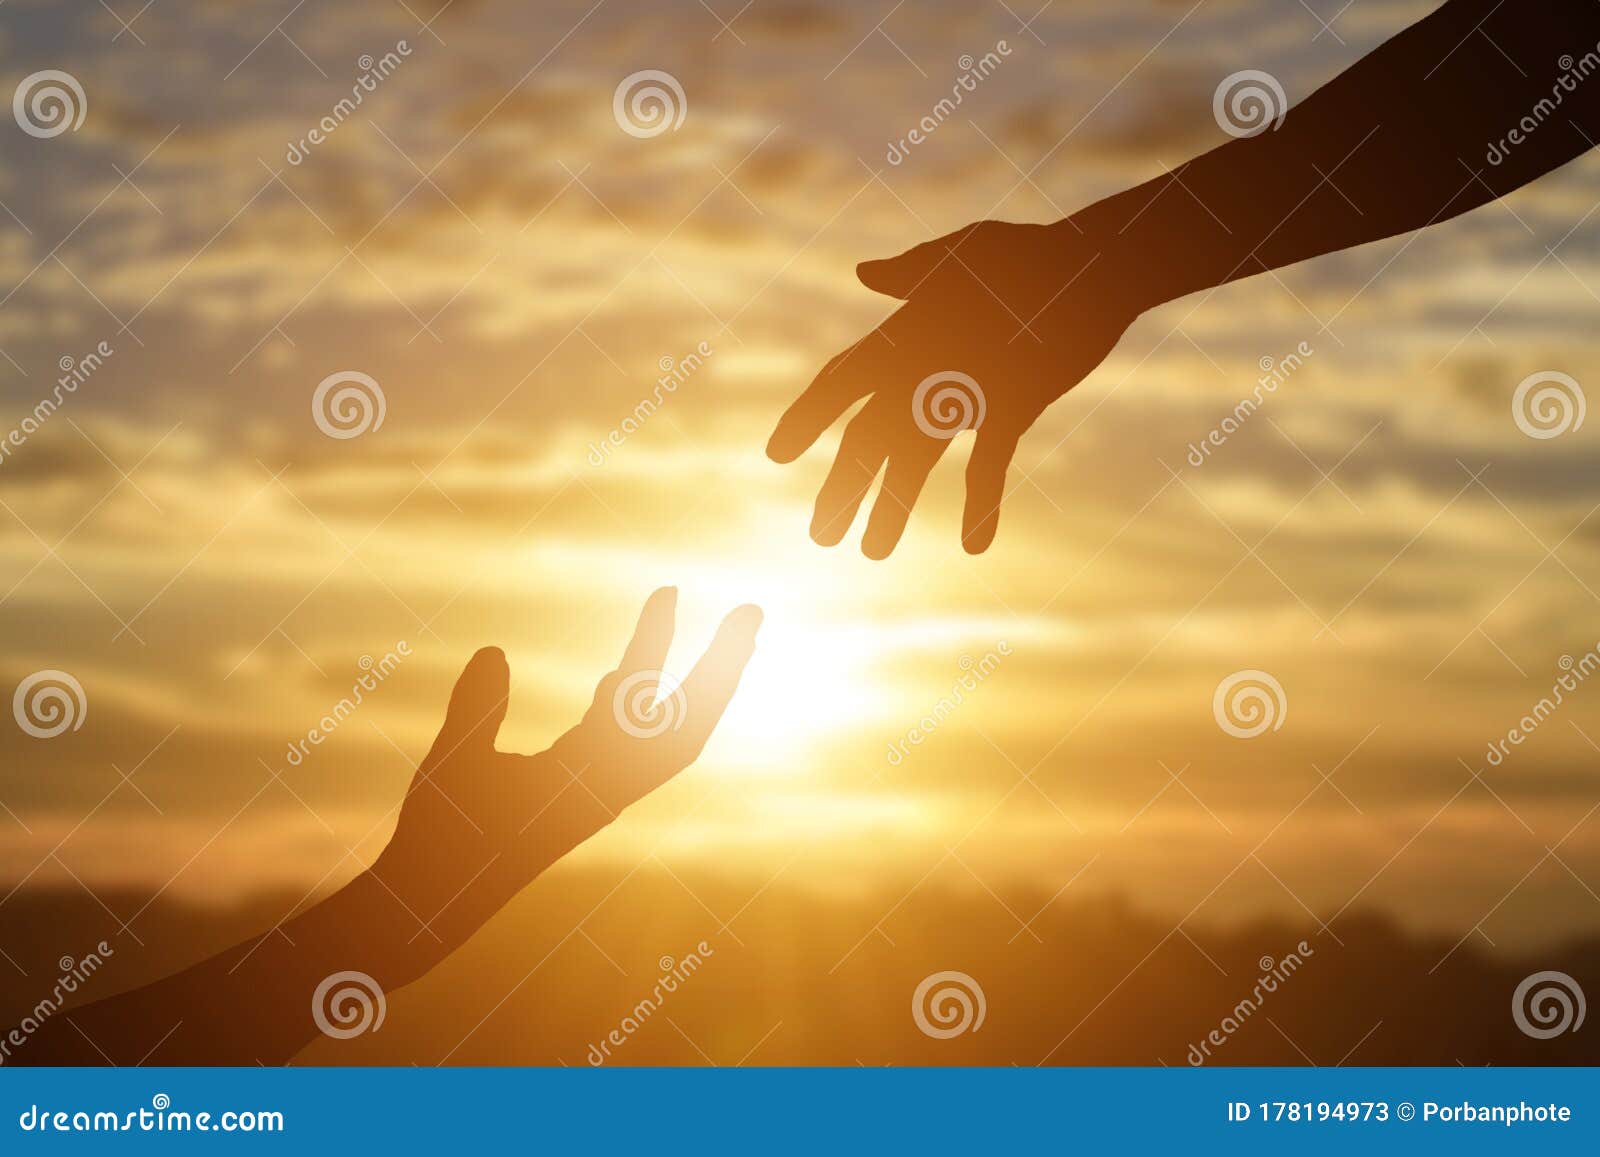 silhouette of giving a helping hand, hope and support each other over sunset